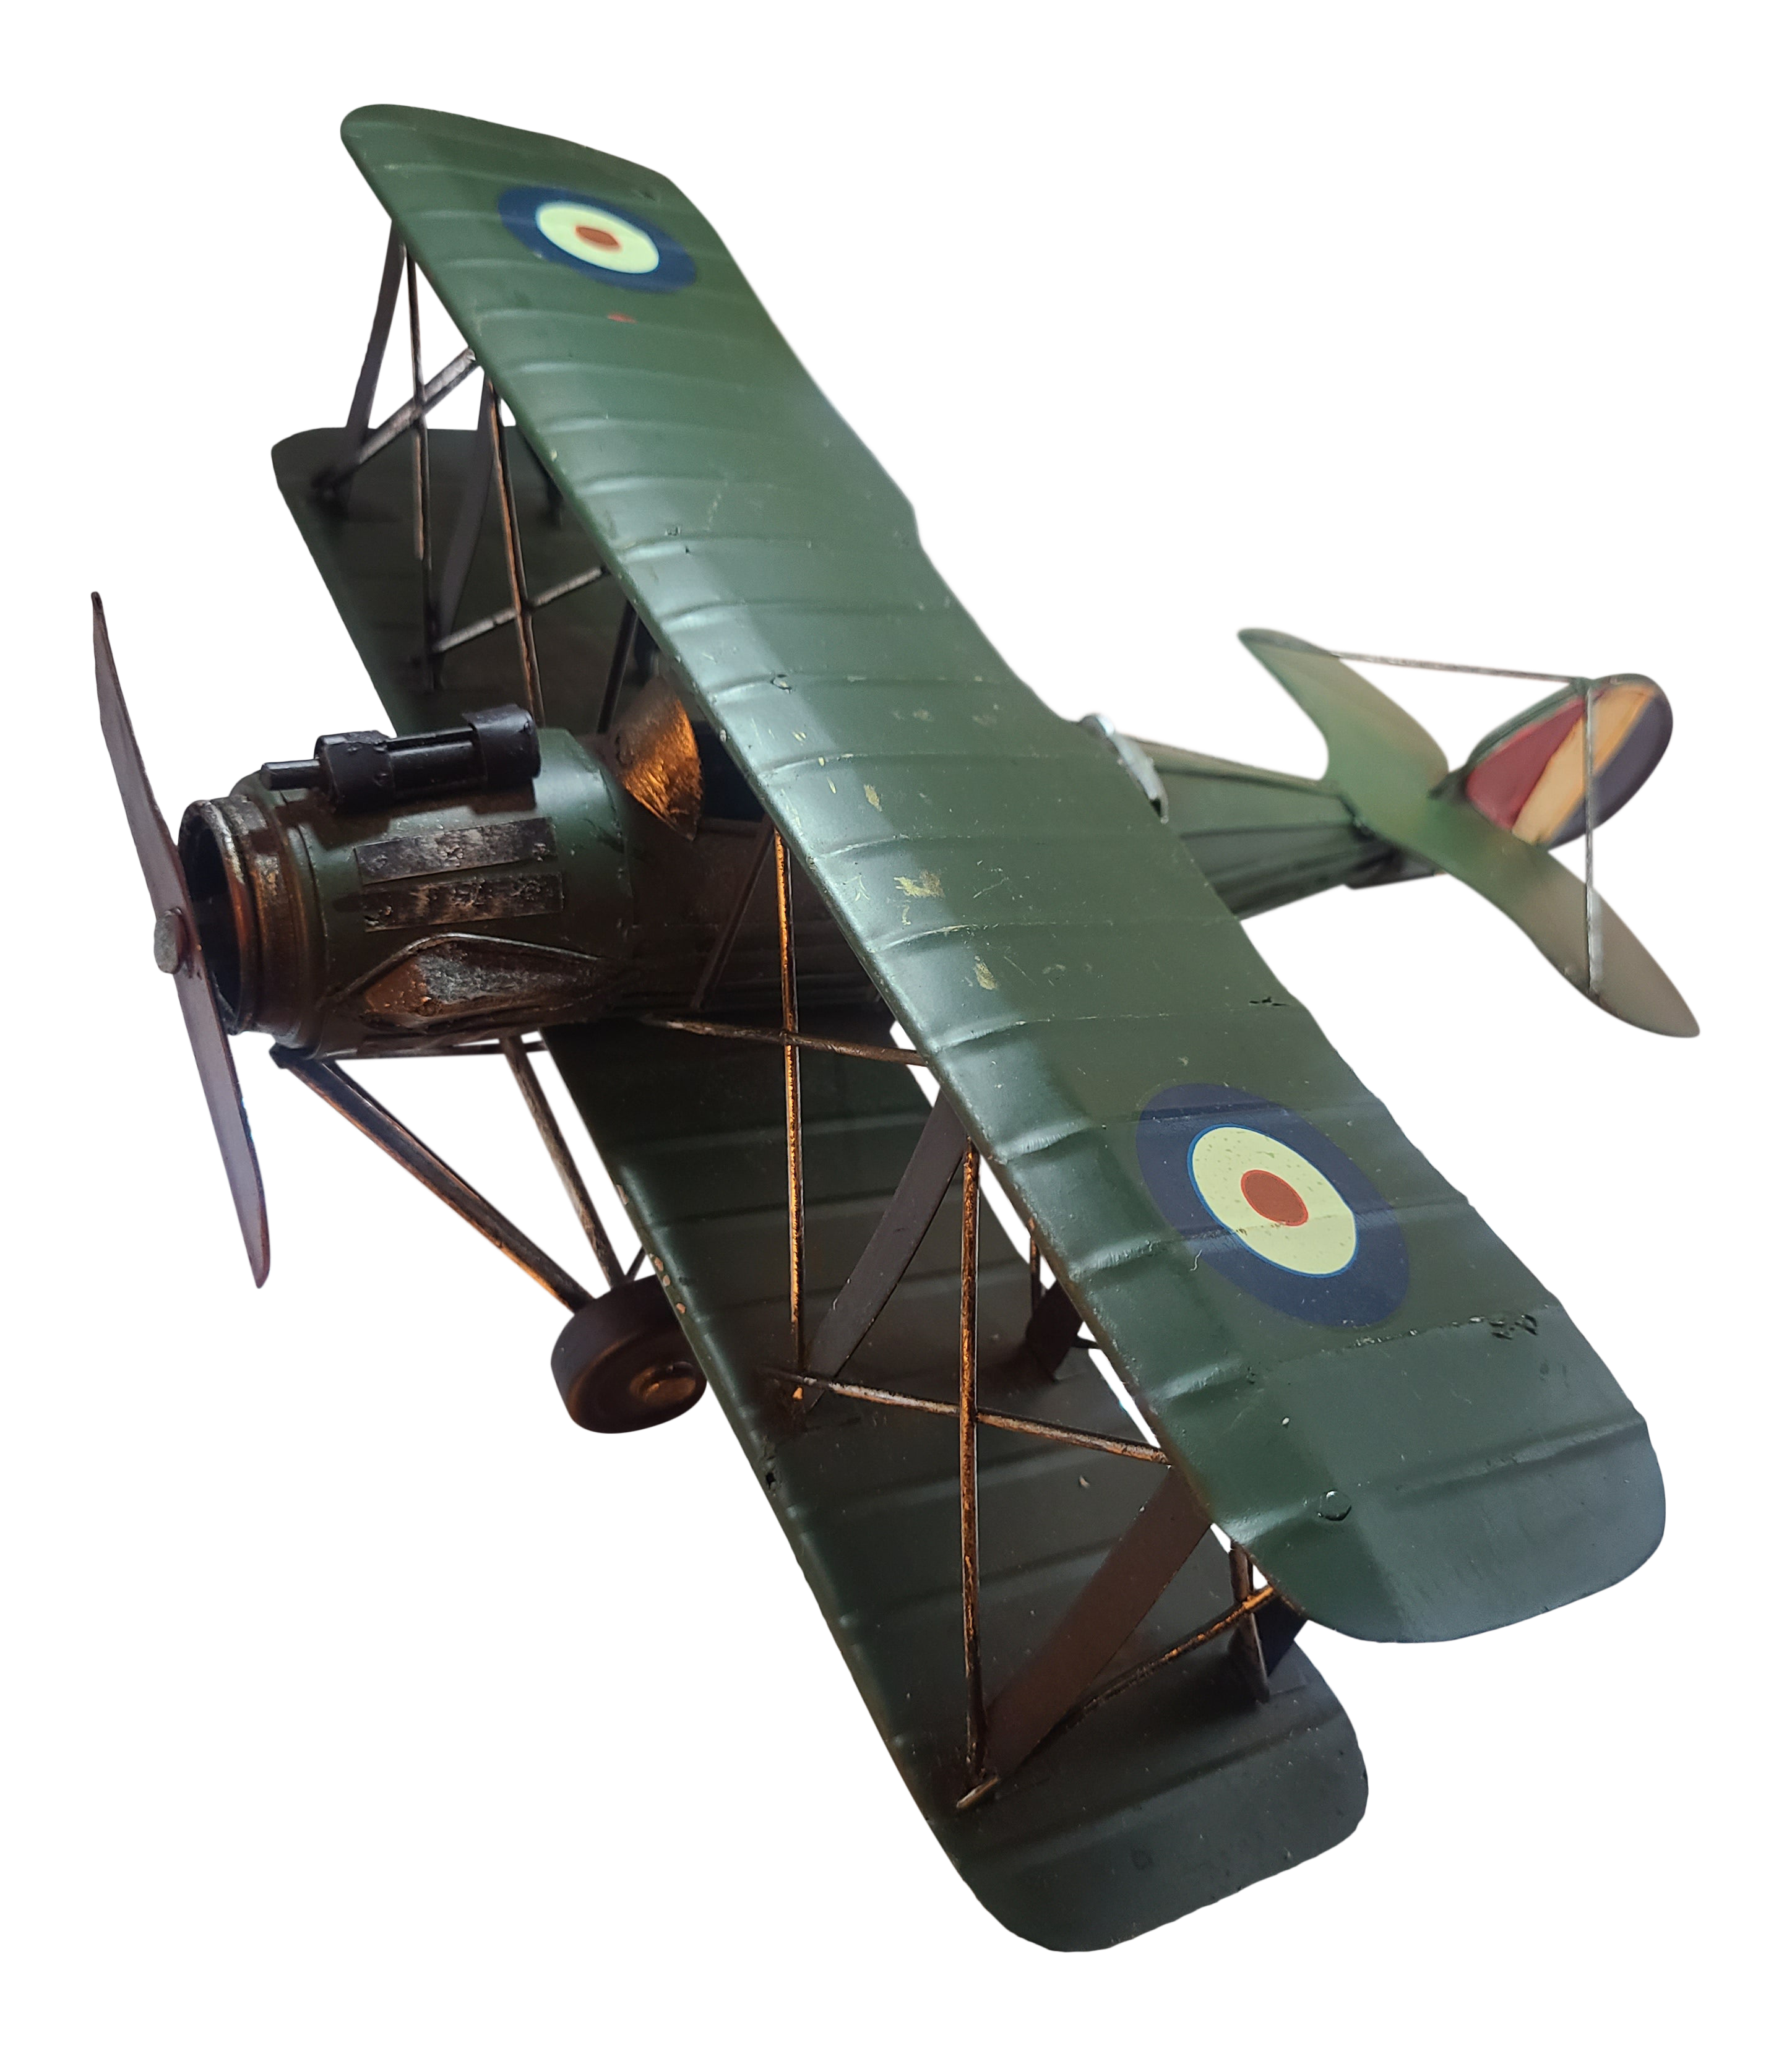 Biplane PNG Picture